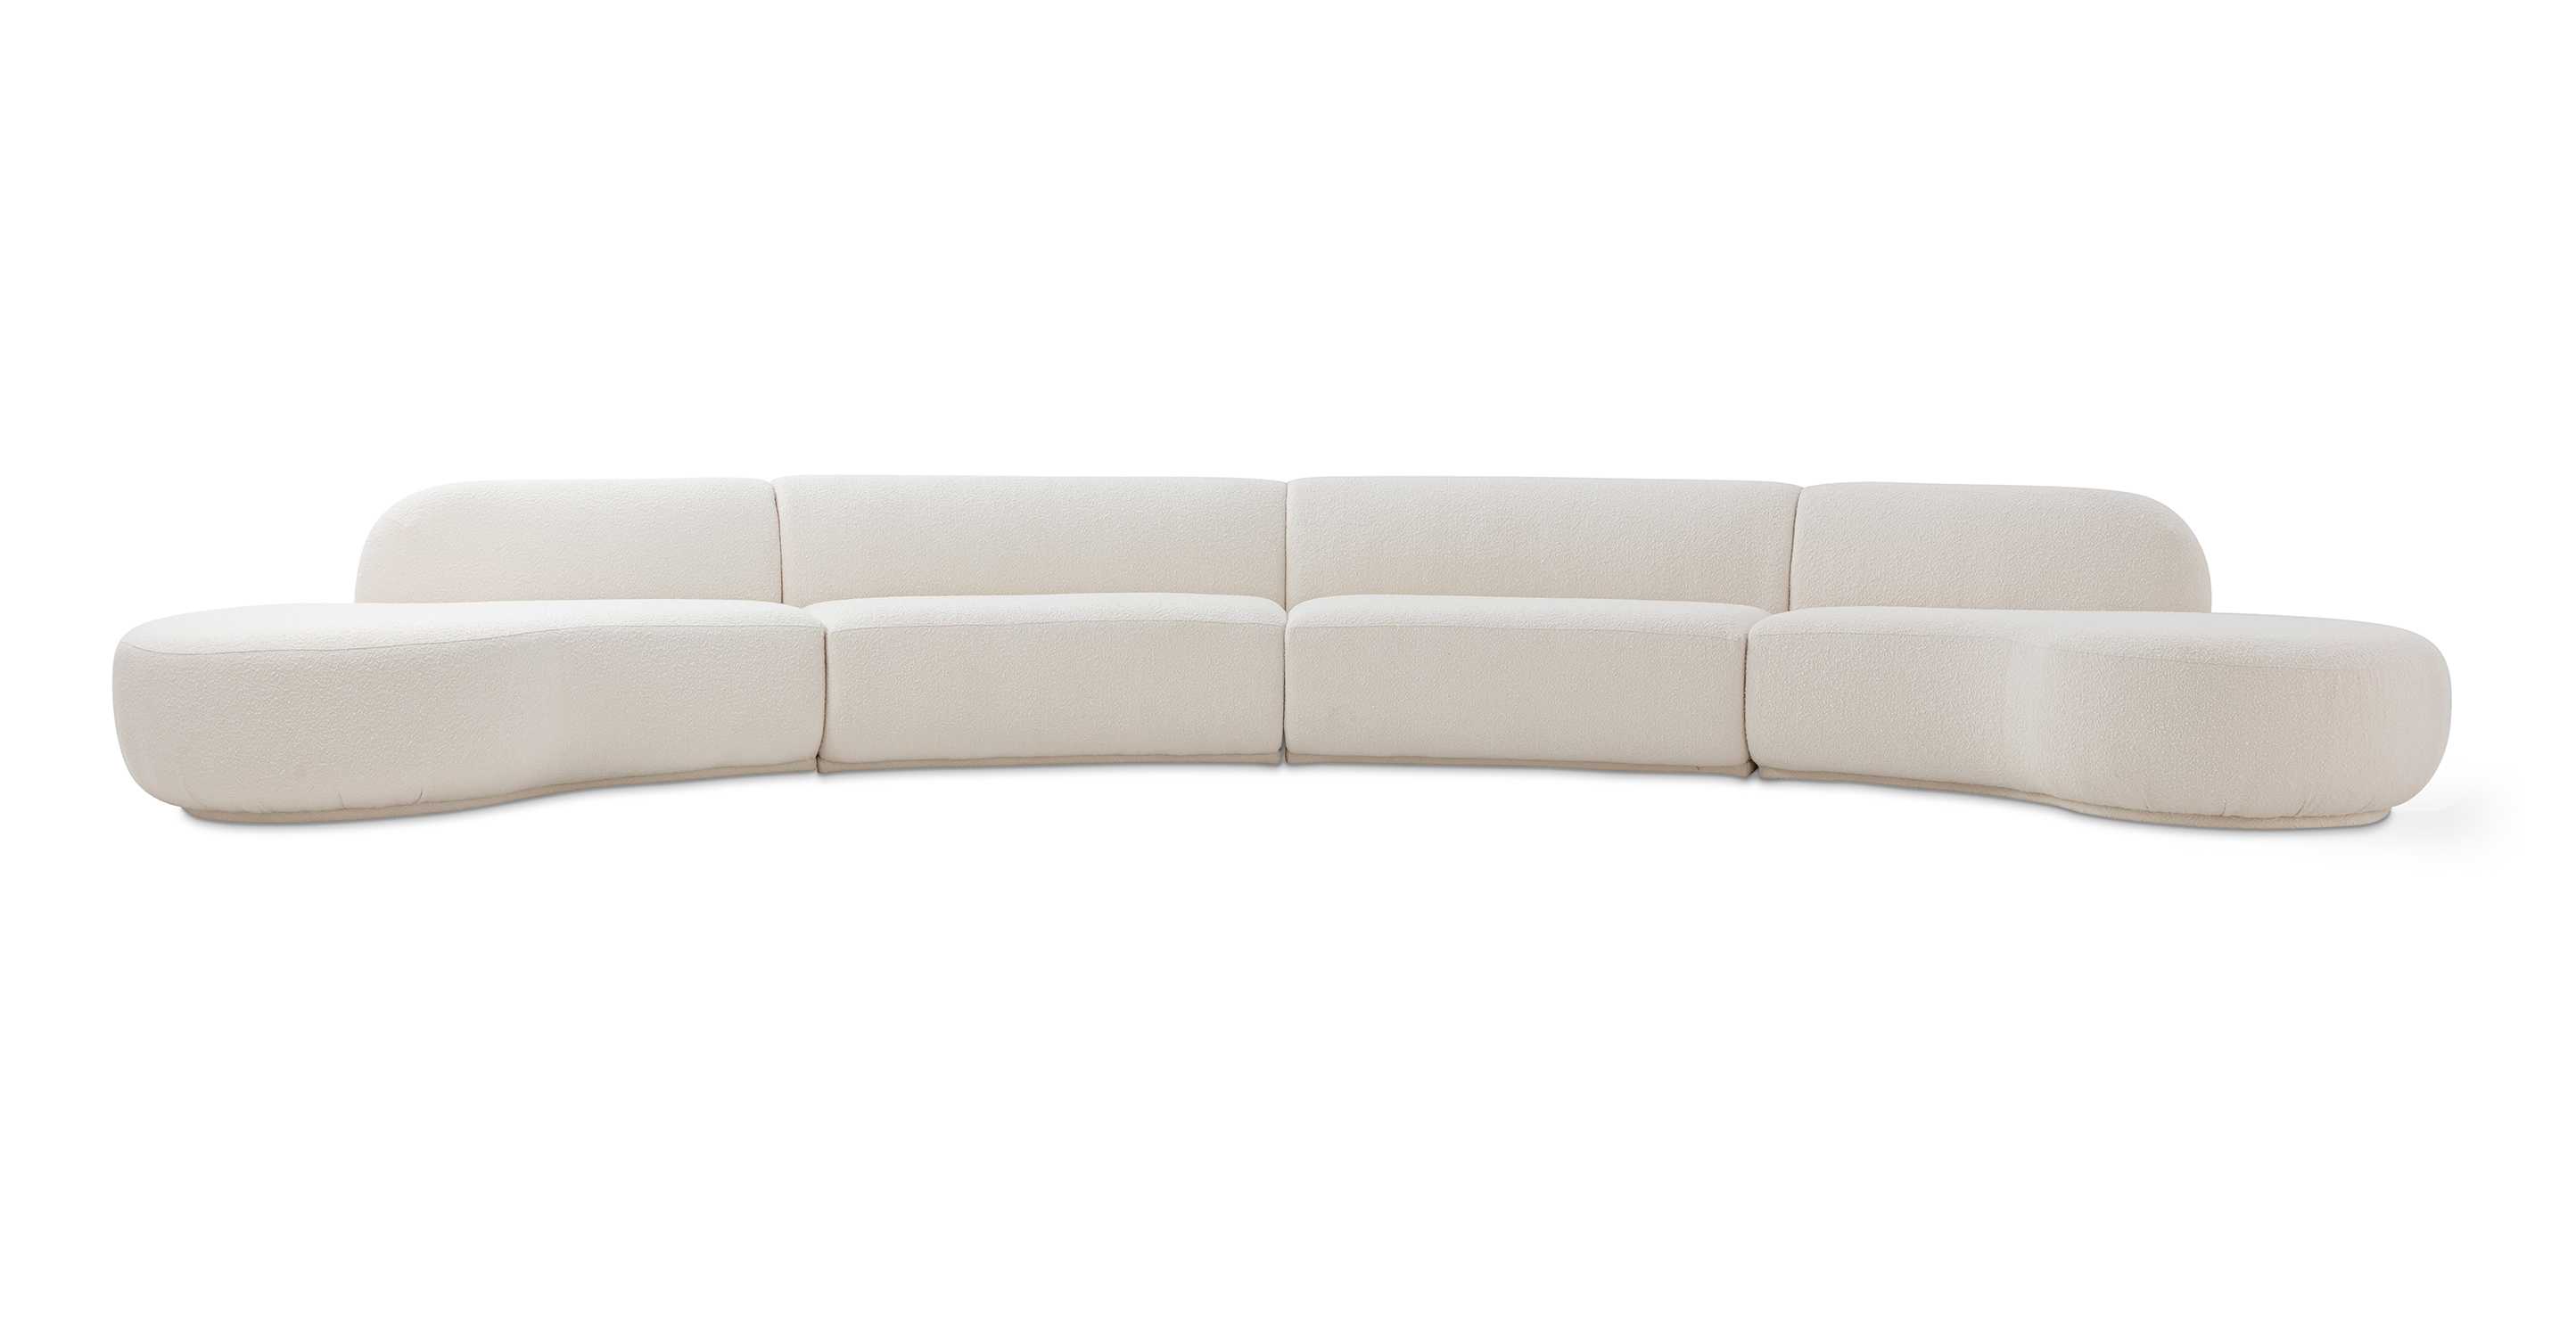 Moon is a floor style component series which items can be added to change the shape and configuration. This series uses two open-ended chaises and two armless love seats to create a narrow backed sofa with open ends. The base is the series is a large seat cushion built into the frame. Smooth rounded back and curved arms bring an understated elegance and modern flare to the series. Included are three round pillows.